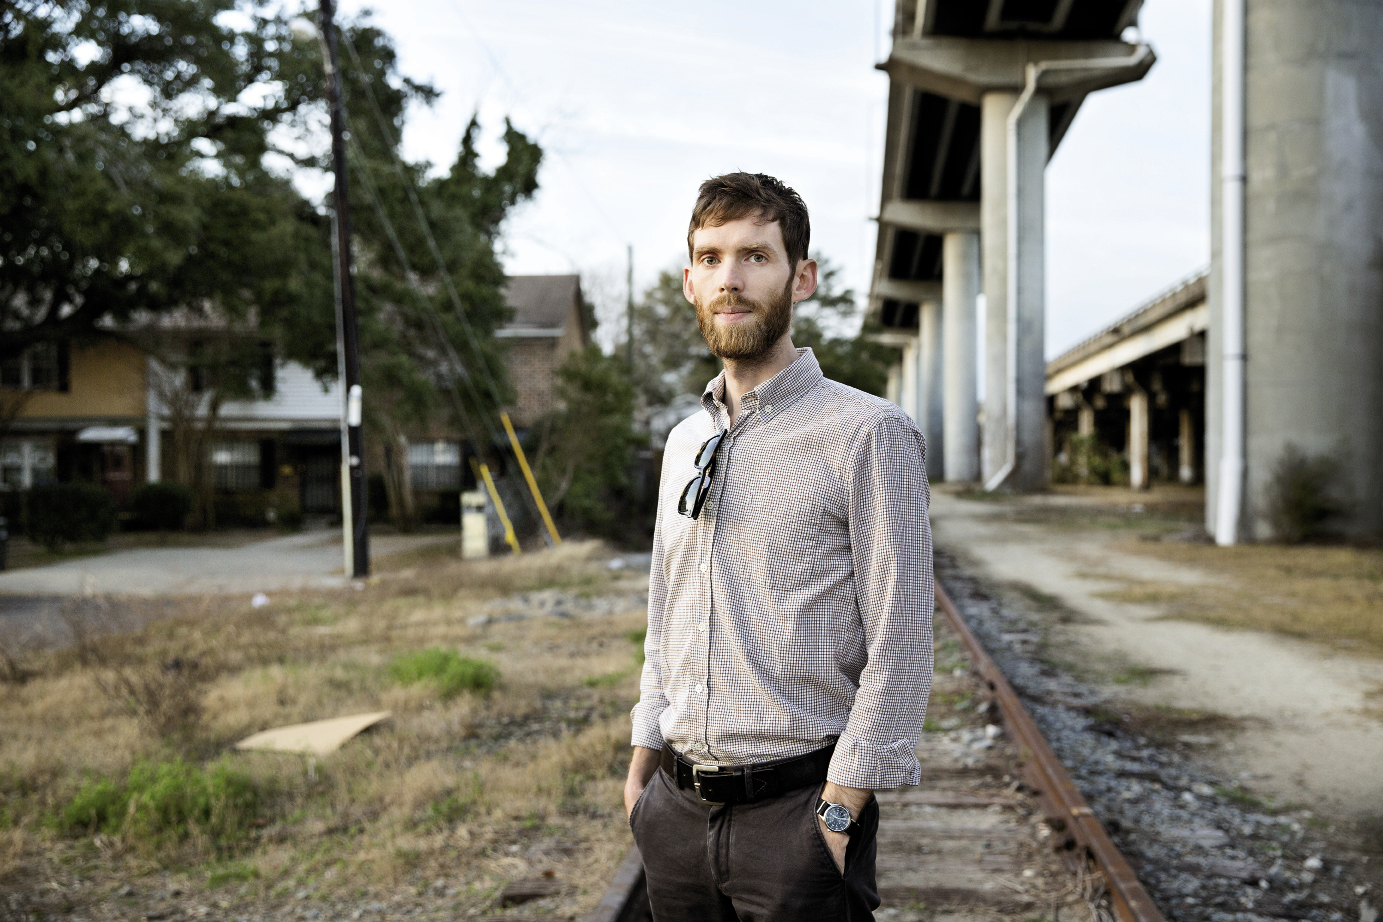 Where many see blight, Lindsey sees potential for urban parks and green space, as he designed here for the Charleston Lowline, a proposed linear park along abandoned railways under I-26 that’s being championed by Mike Messner and the Speedwell Foundation.